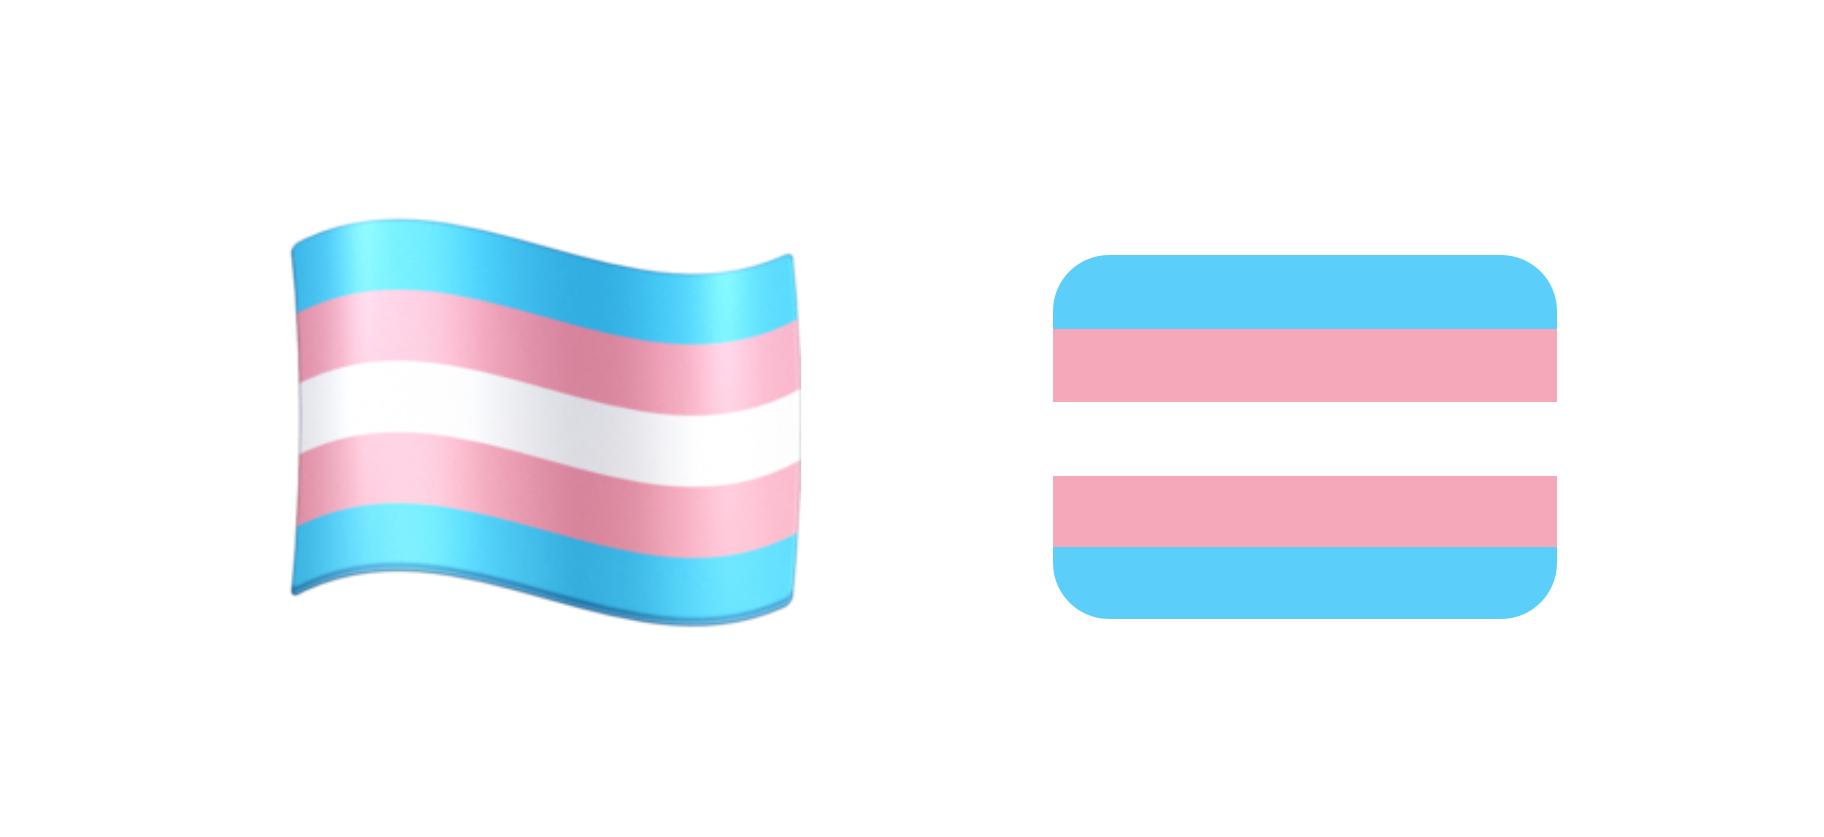 Bisexual Flag Copy And Paste